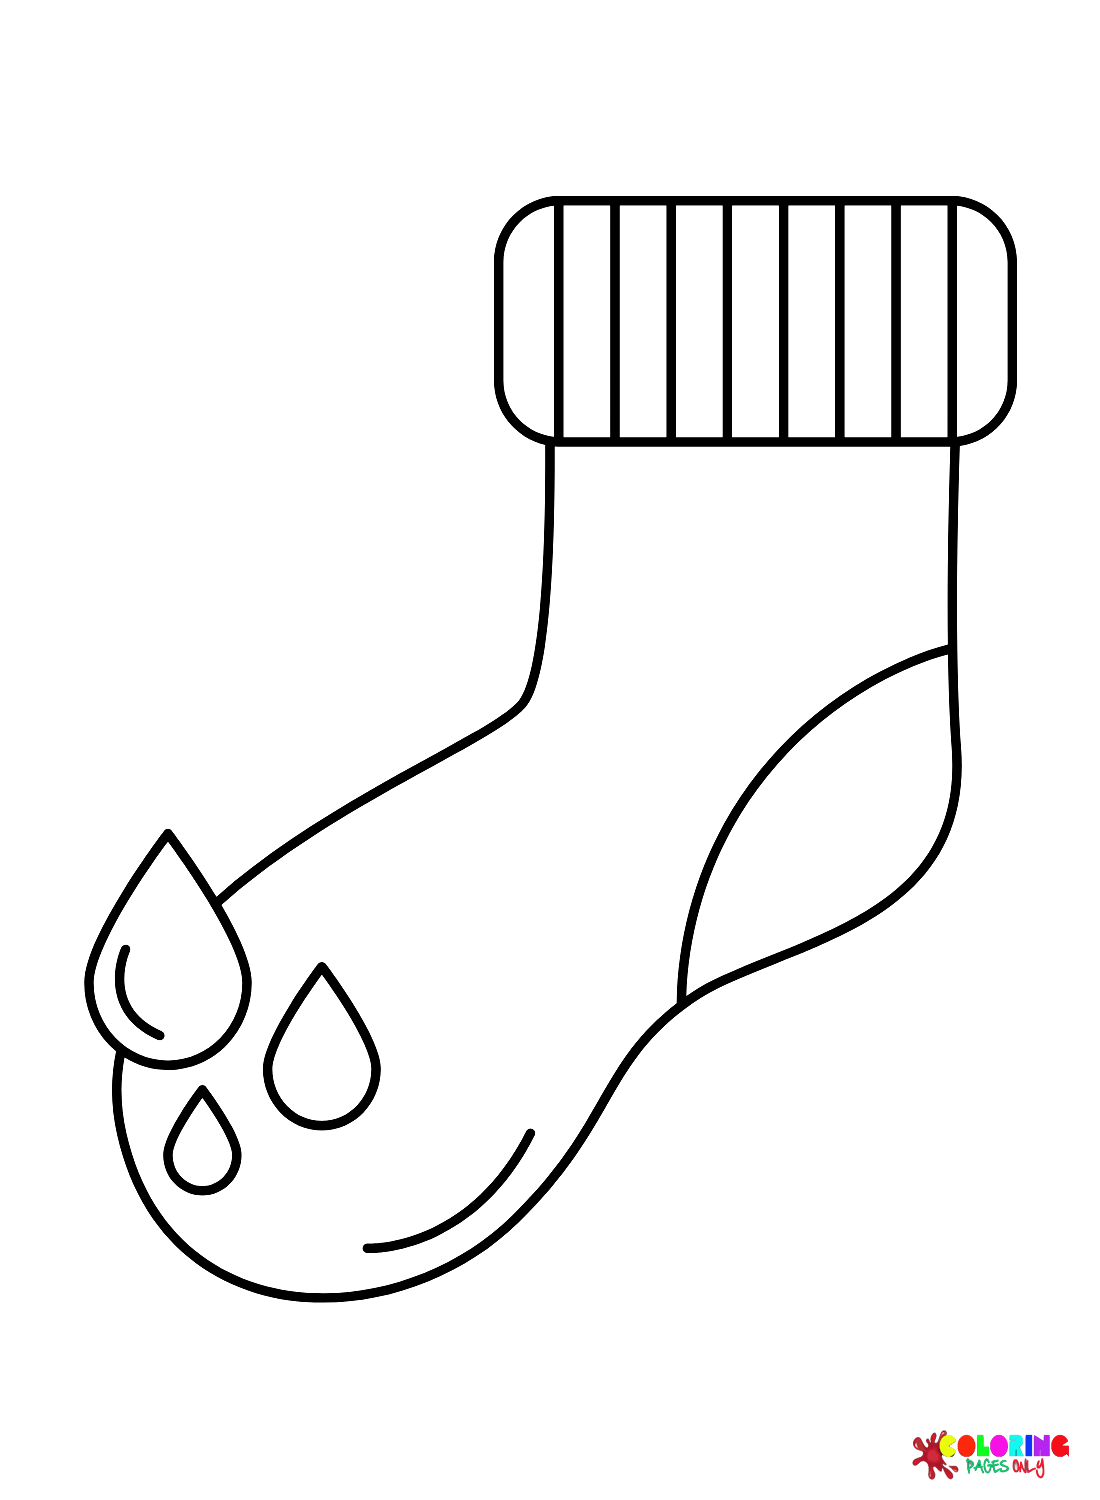 Socks coloring pages printable for free download